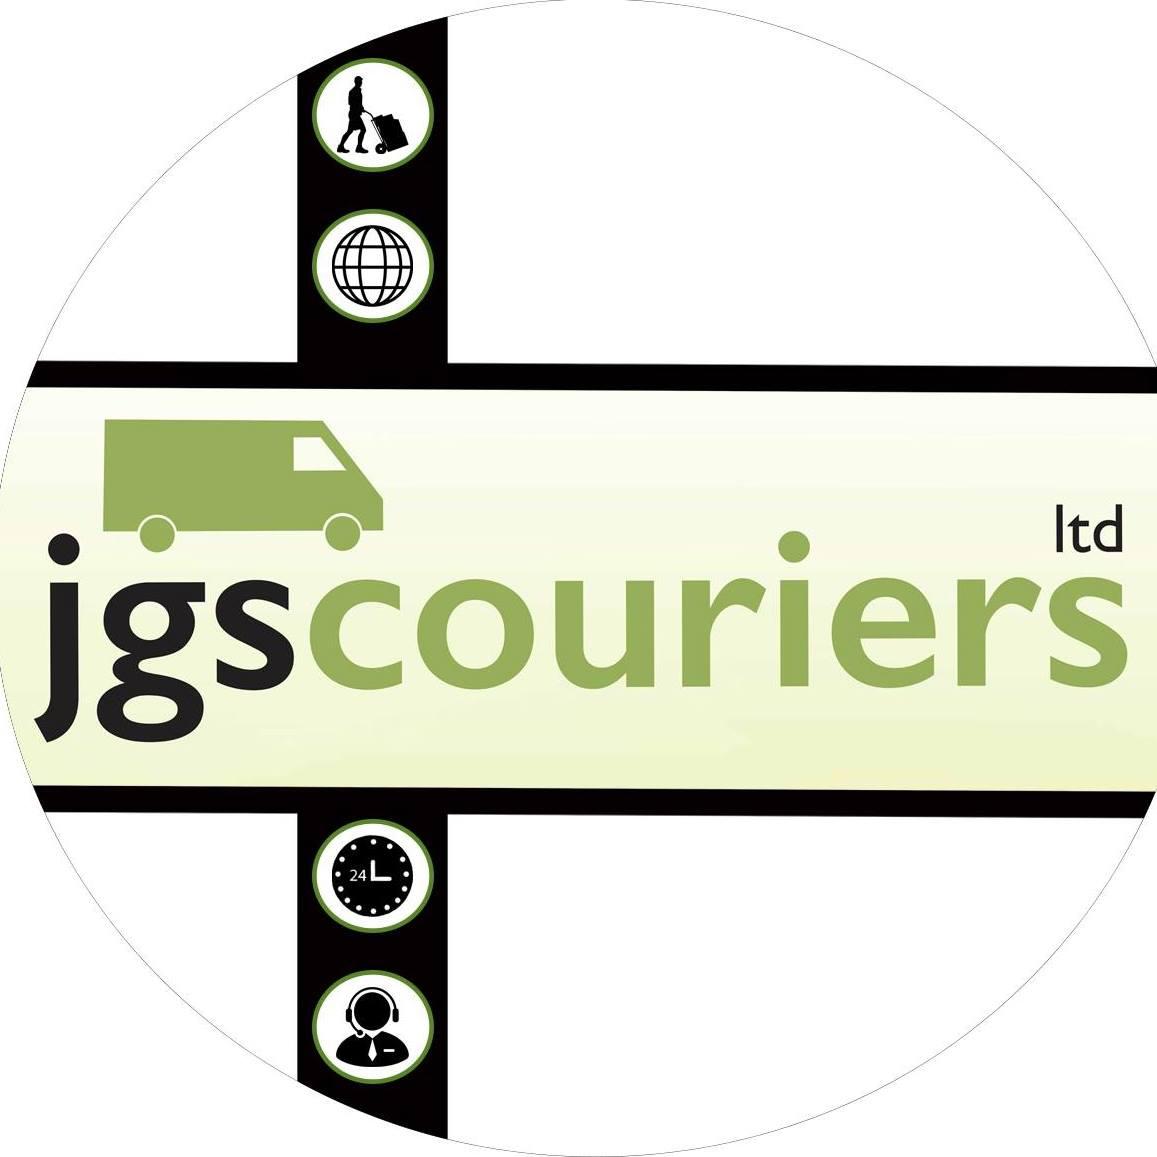 JGS Couriers Ltd - Worcester, Worcestershire WR1 1HD - 01905 640518 | ShowMeLocal.com